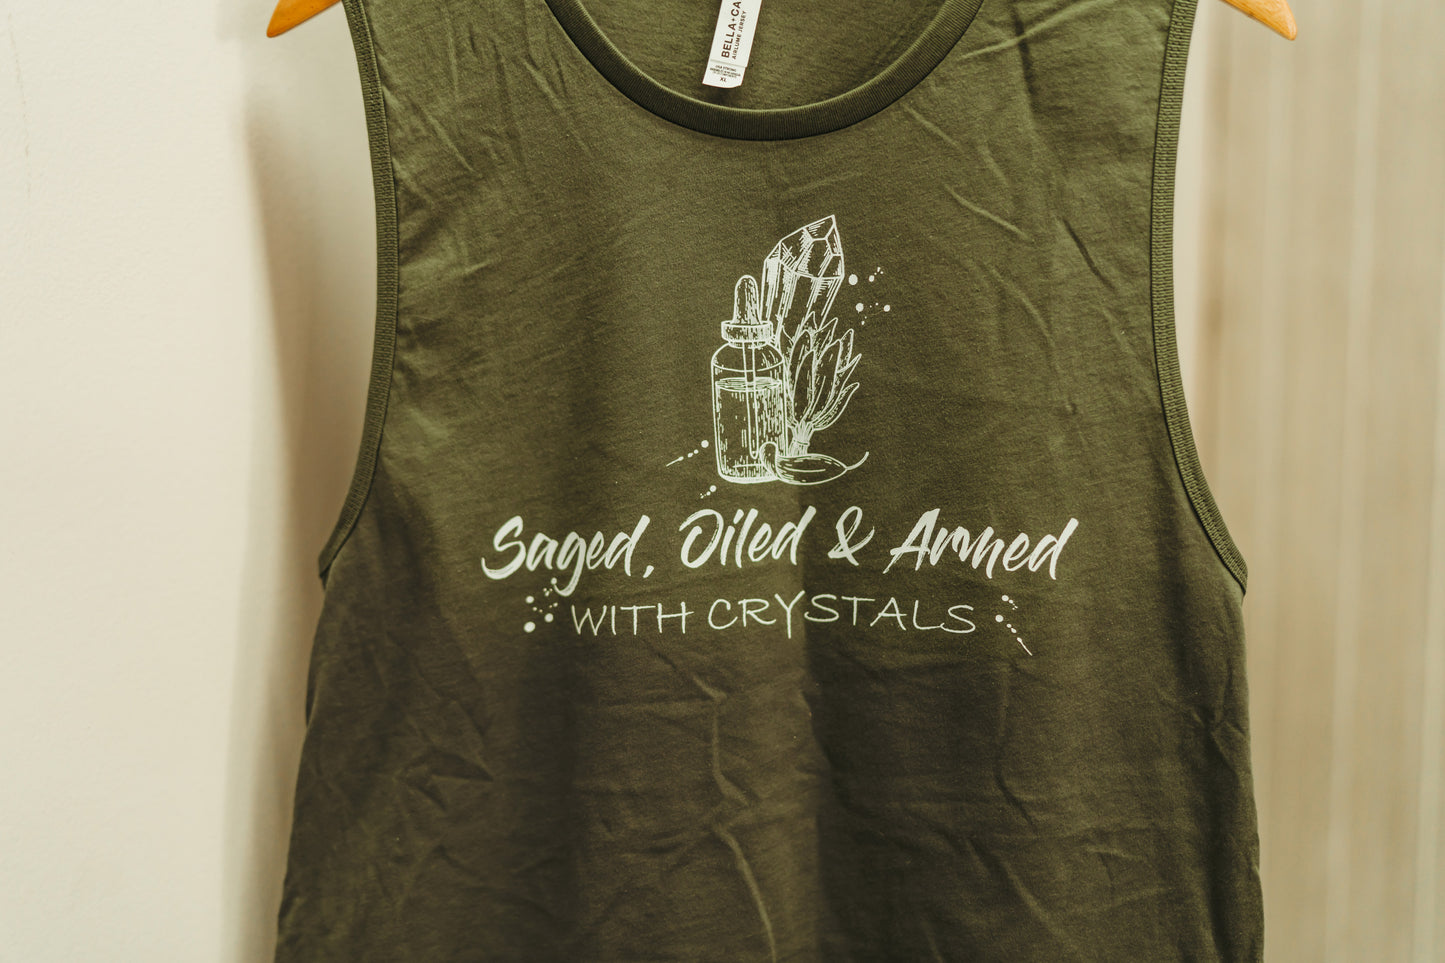 Women's Saged, Oiled & Armed with Crystals Muscle Tank